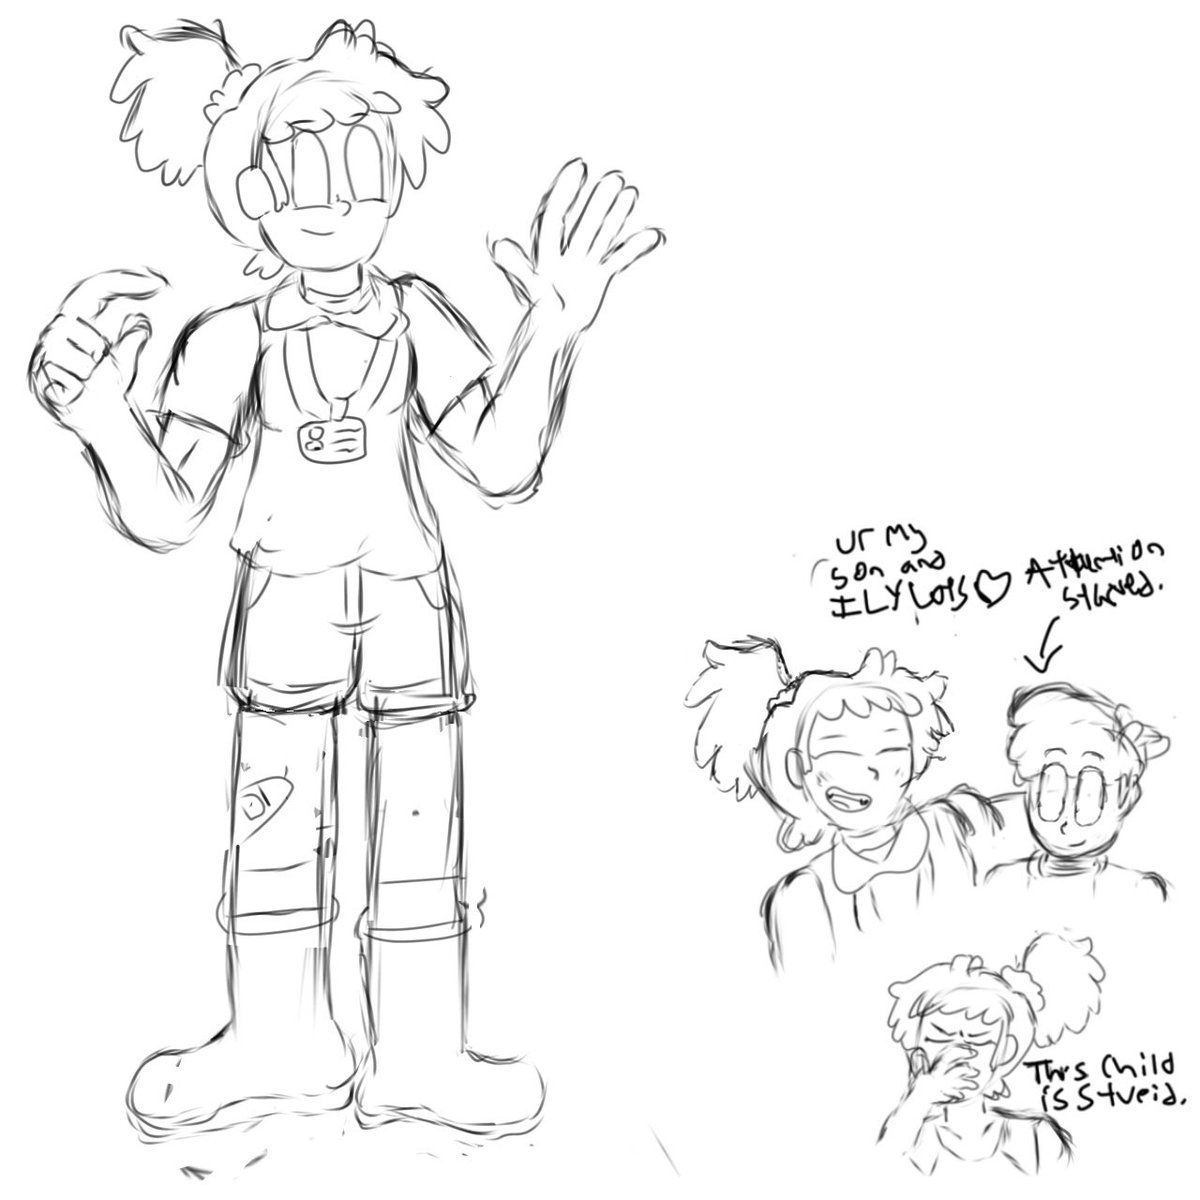 I am never going to finish this so just take the character sheet #Amphibia #AmphibiaAU #AnneBoonchuy